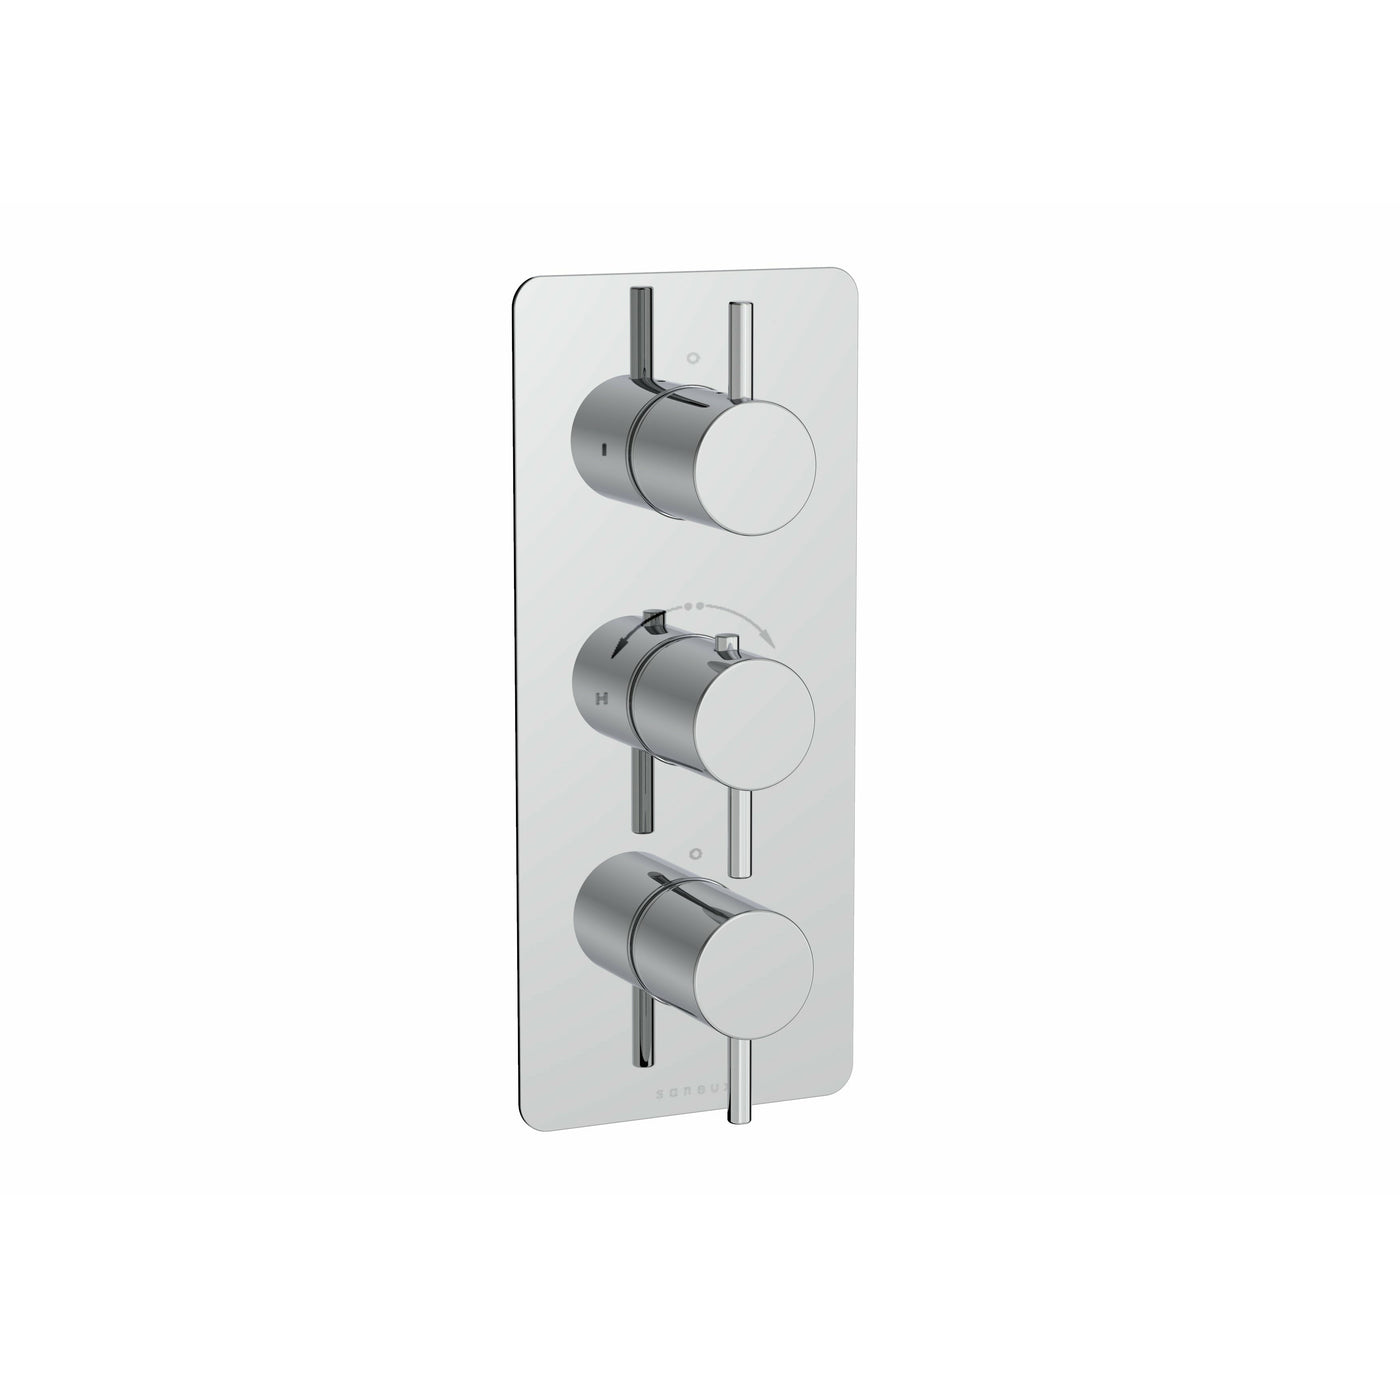 Saneux Chrome 3 hole - 3 Outlets thermostatic valve handle with plate, Round - Letta London - Thermostatic Showers